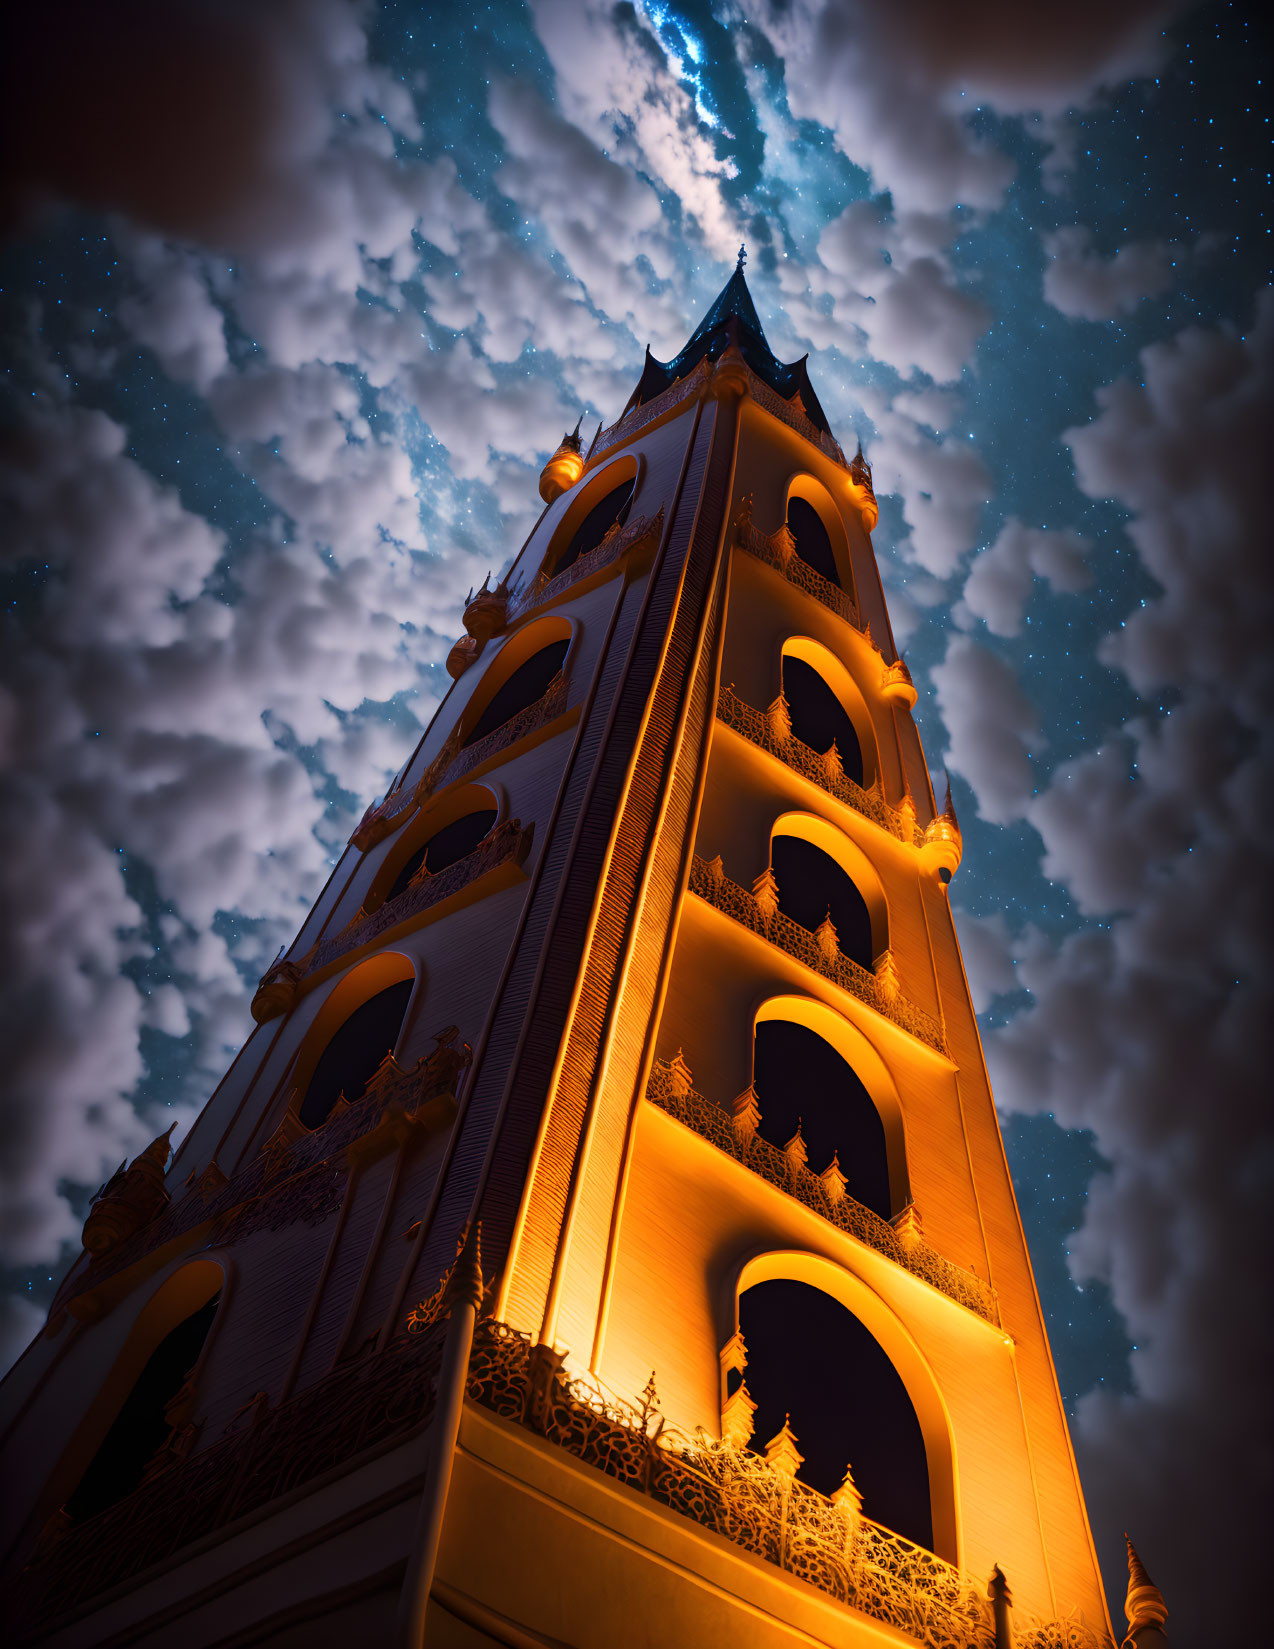 Majestic illuminated tower against night sky and stars